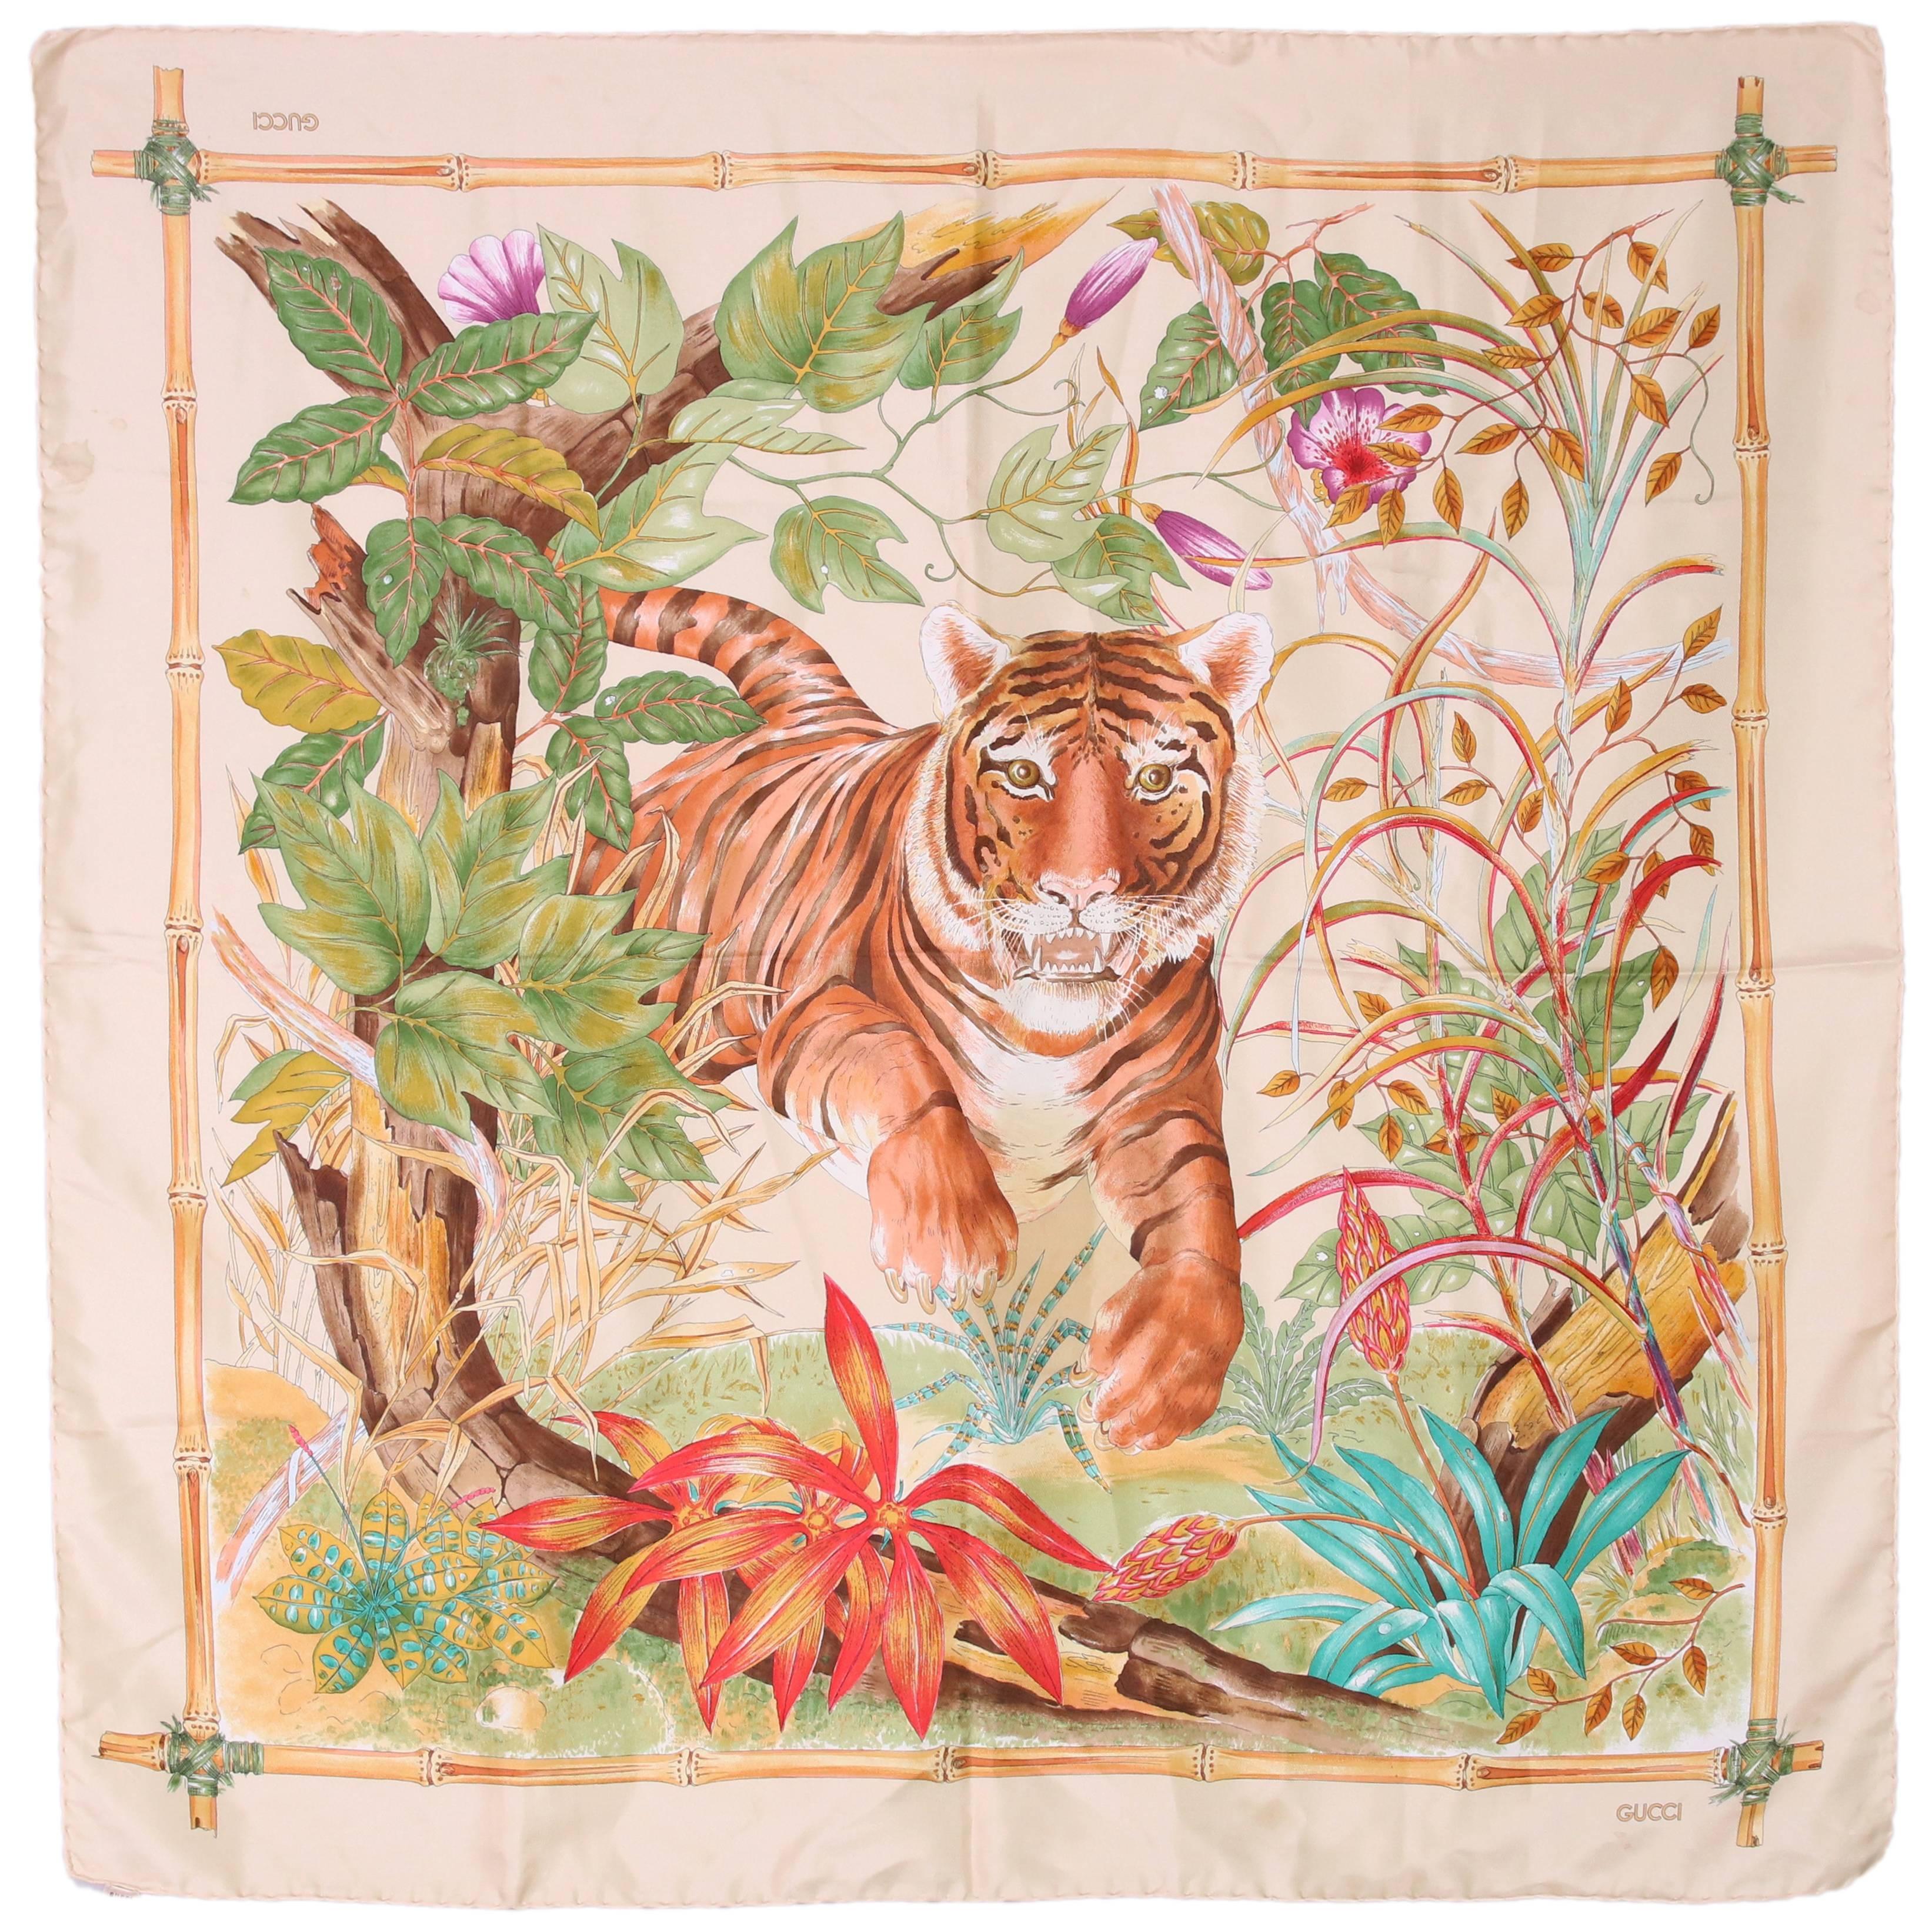 1970's Gucci Silk Scarf Featuring a Tiger Against A Jungle Background